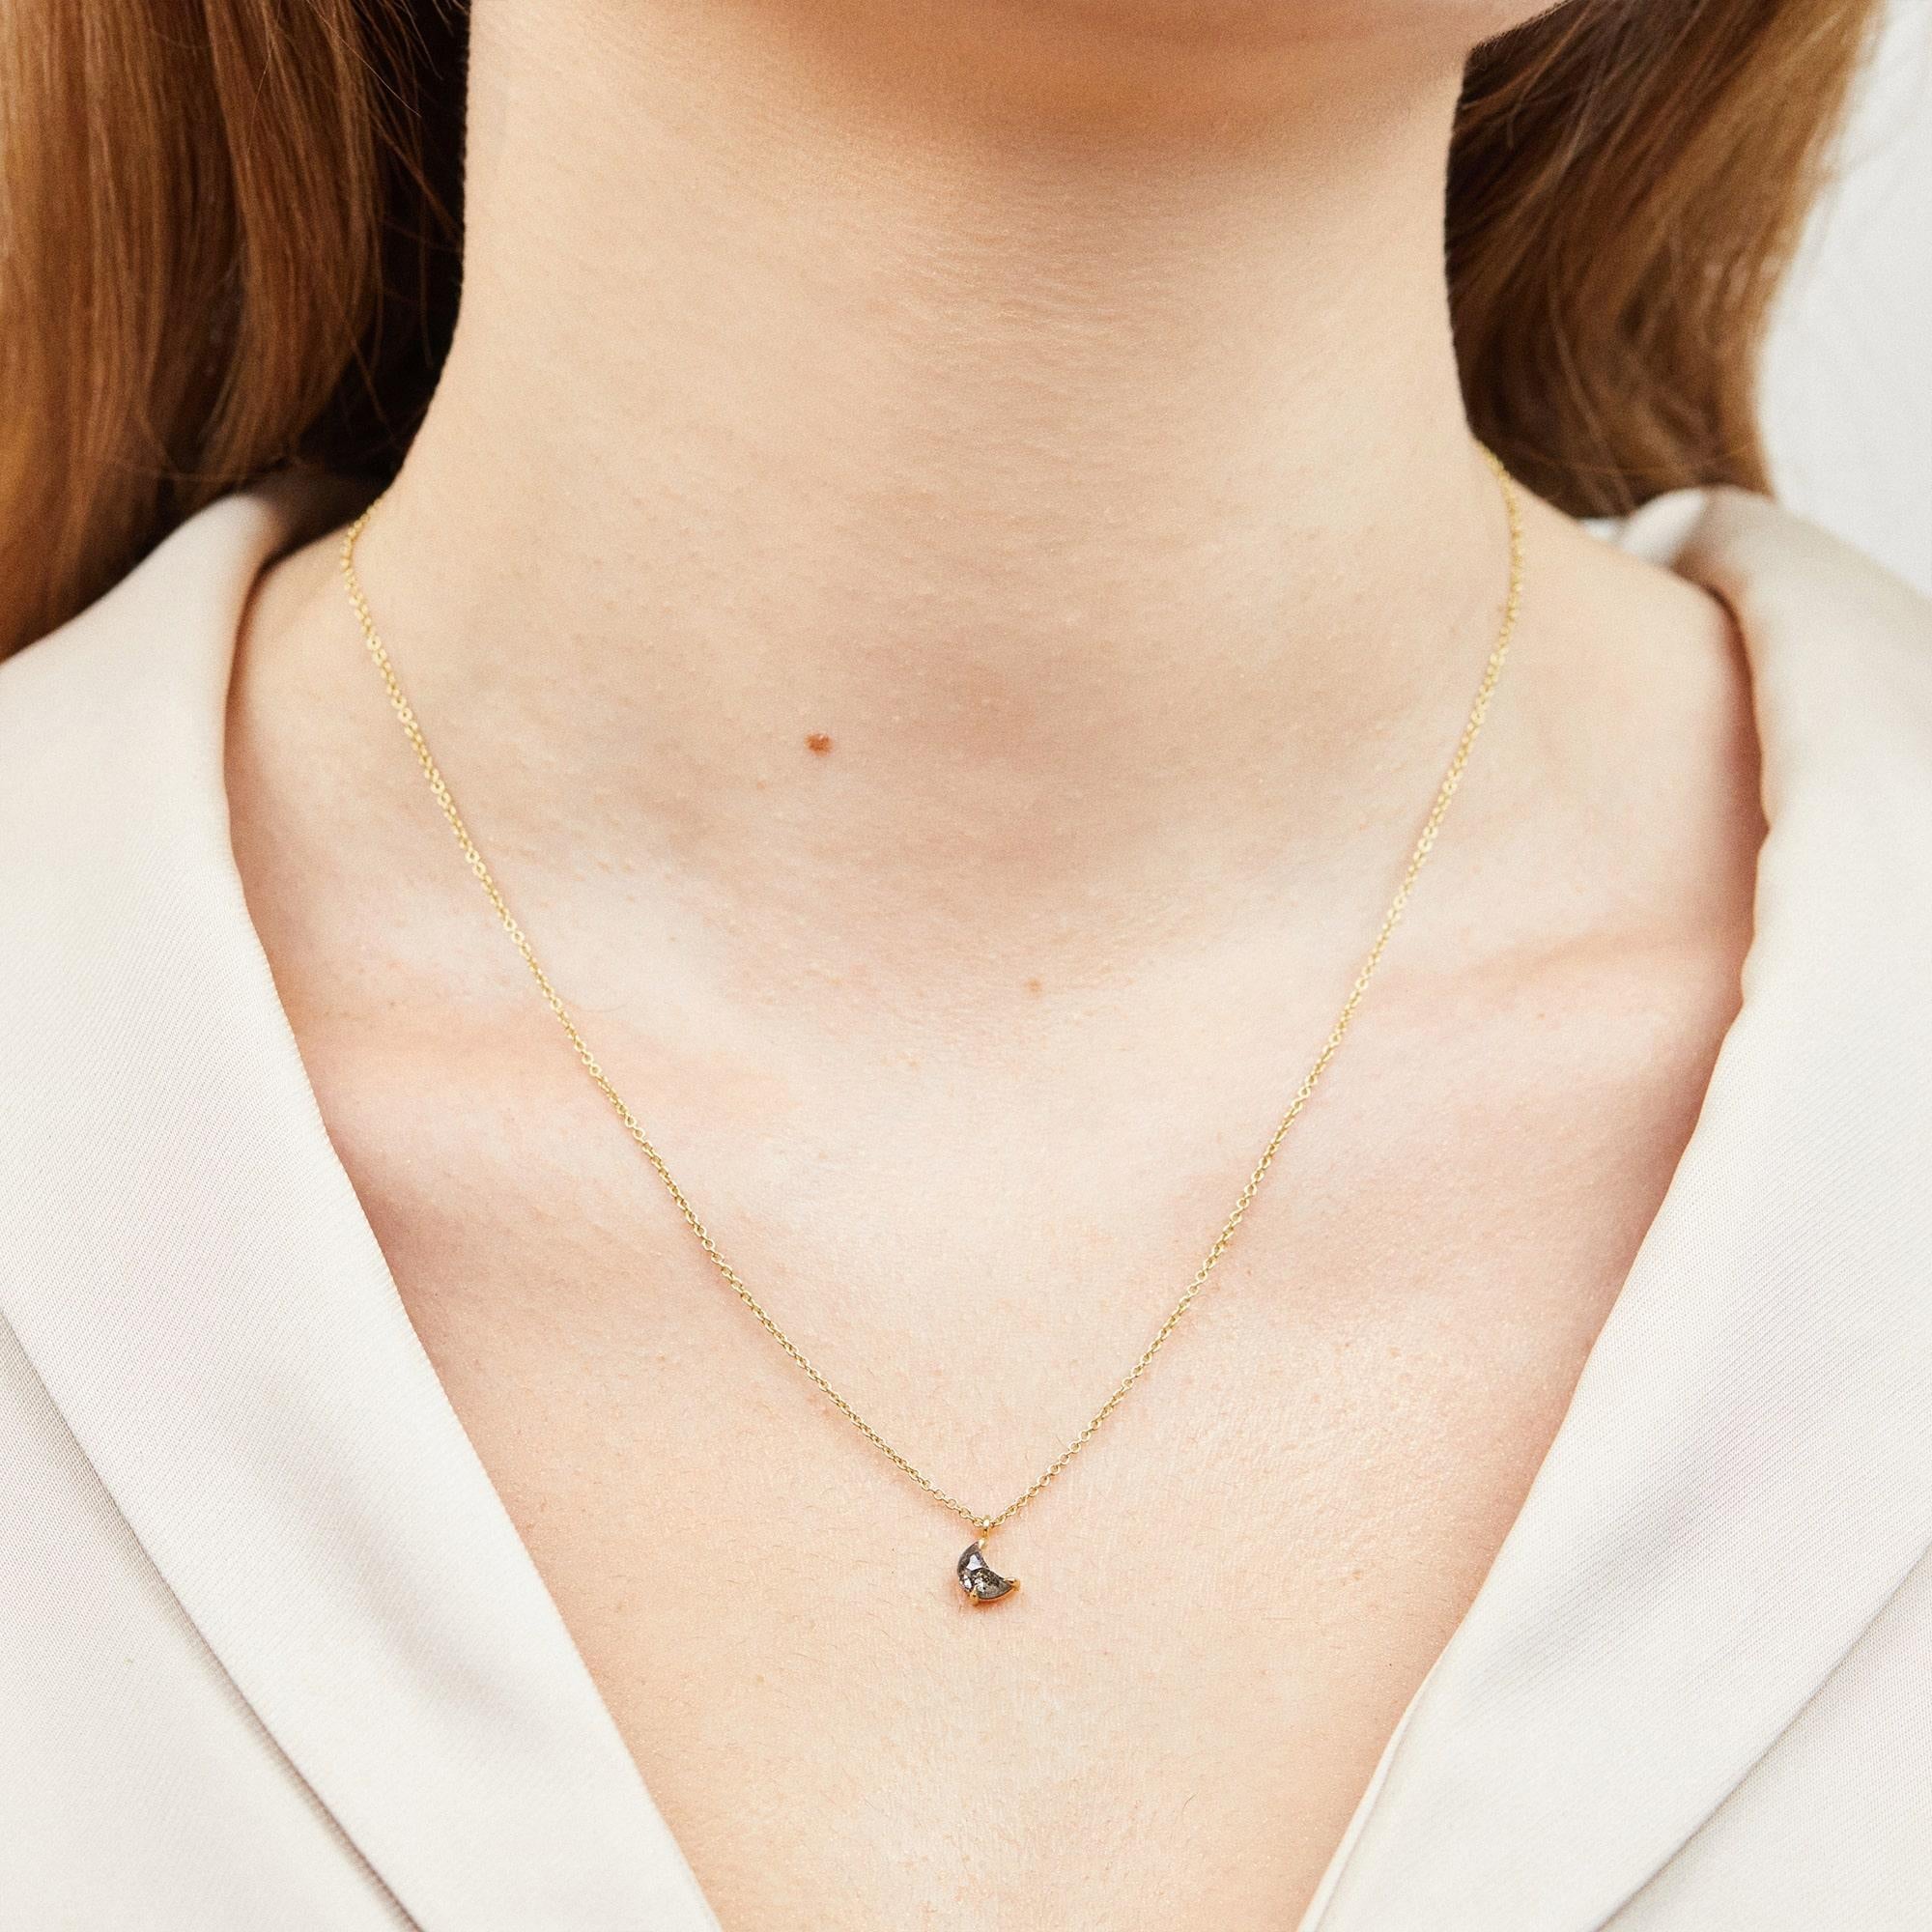 Stone
- Diamond
- Shape: Crescent moon
- Carat weight: 0.60
- Colour: Salt & pepper

Setting
- 18ct yellow gold
- 16 inch necklace chain

Shipping Information:
This necklace is ready to ship and can be delivered within 5 working days
If you would